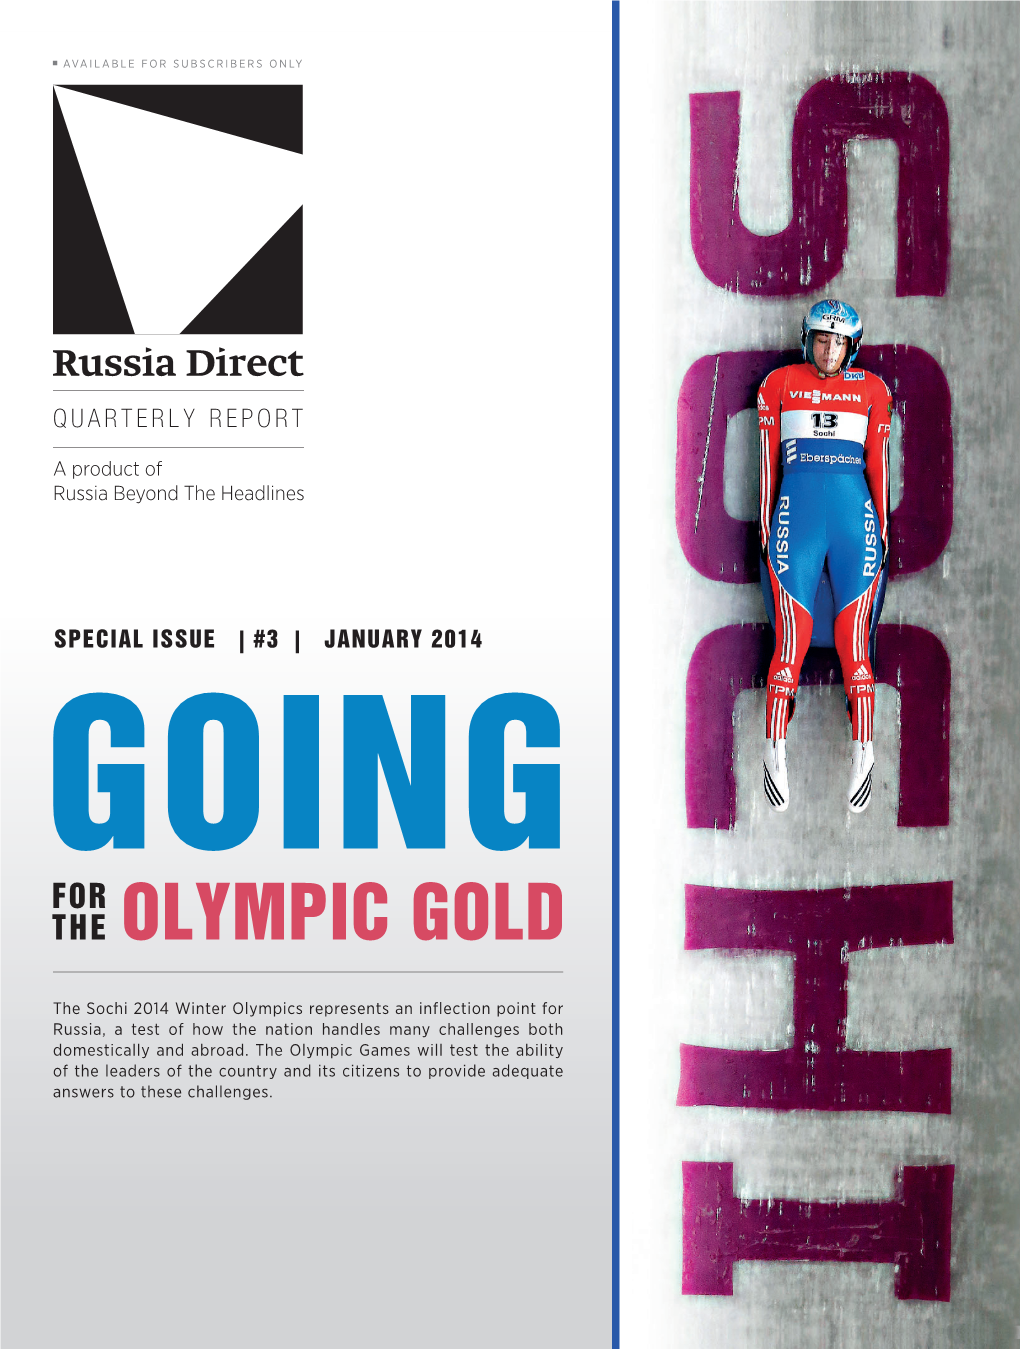 The Sochi 2014 Winter Olympics Represents an Inflection Point for Russia, a Test of How the Nation Handles Many Challenges Both Domestically and Abroad